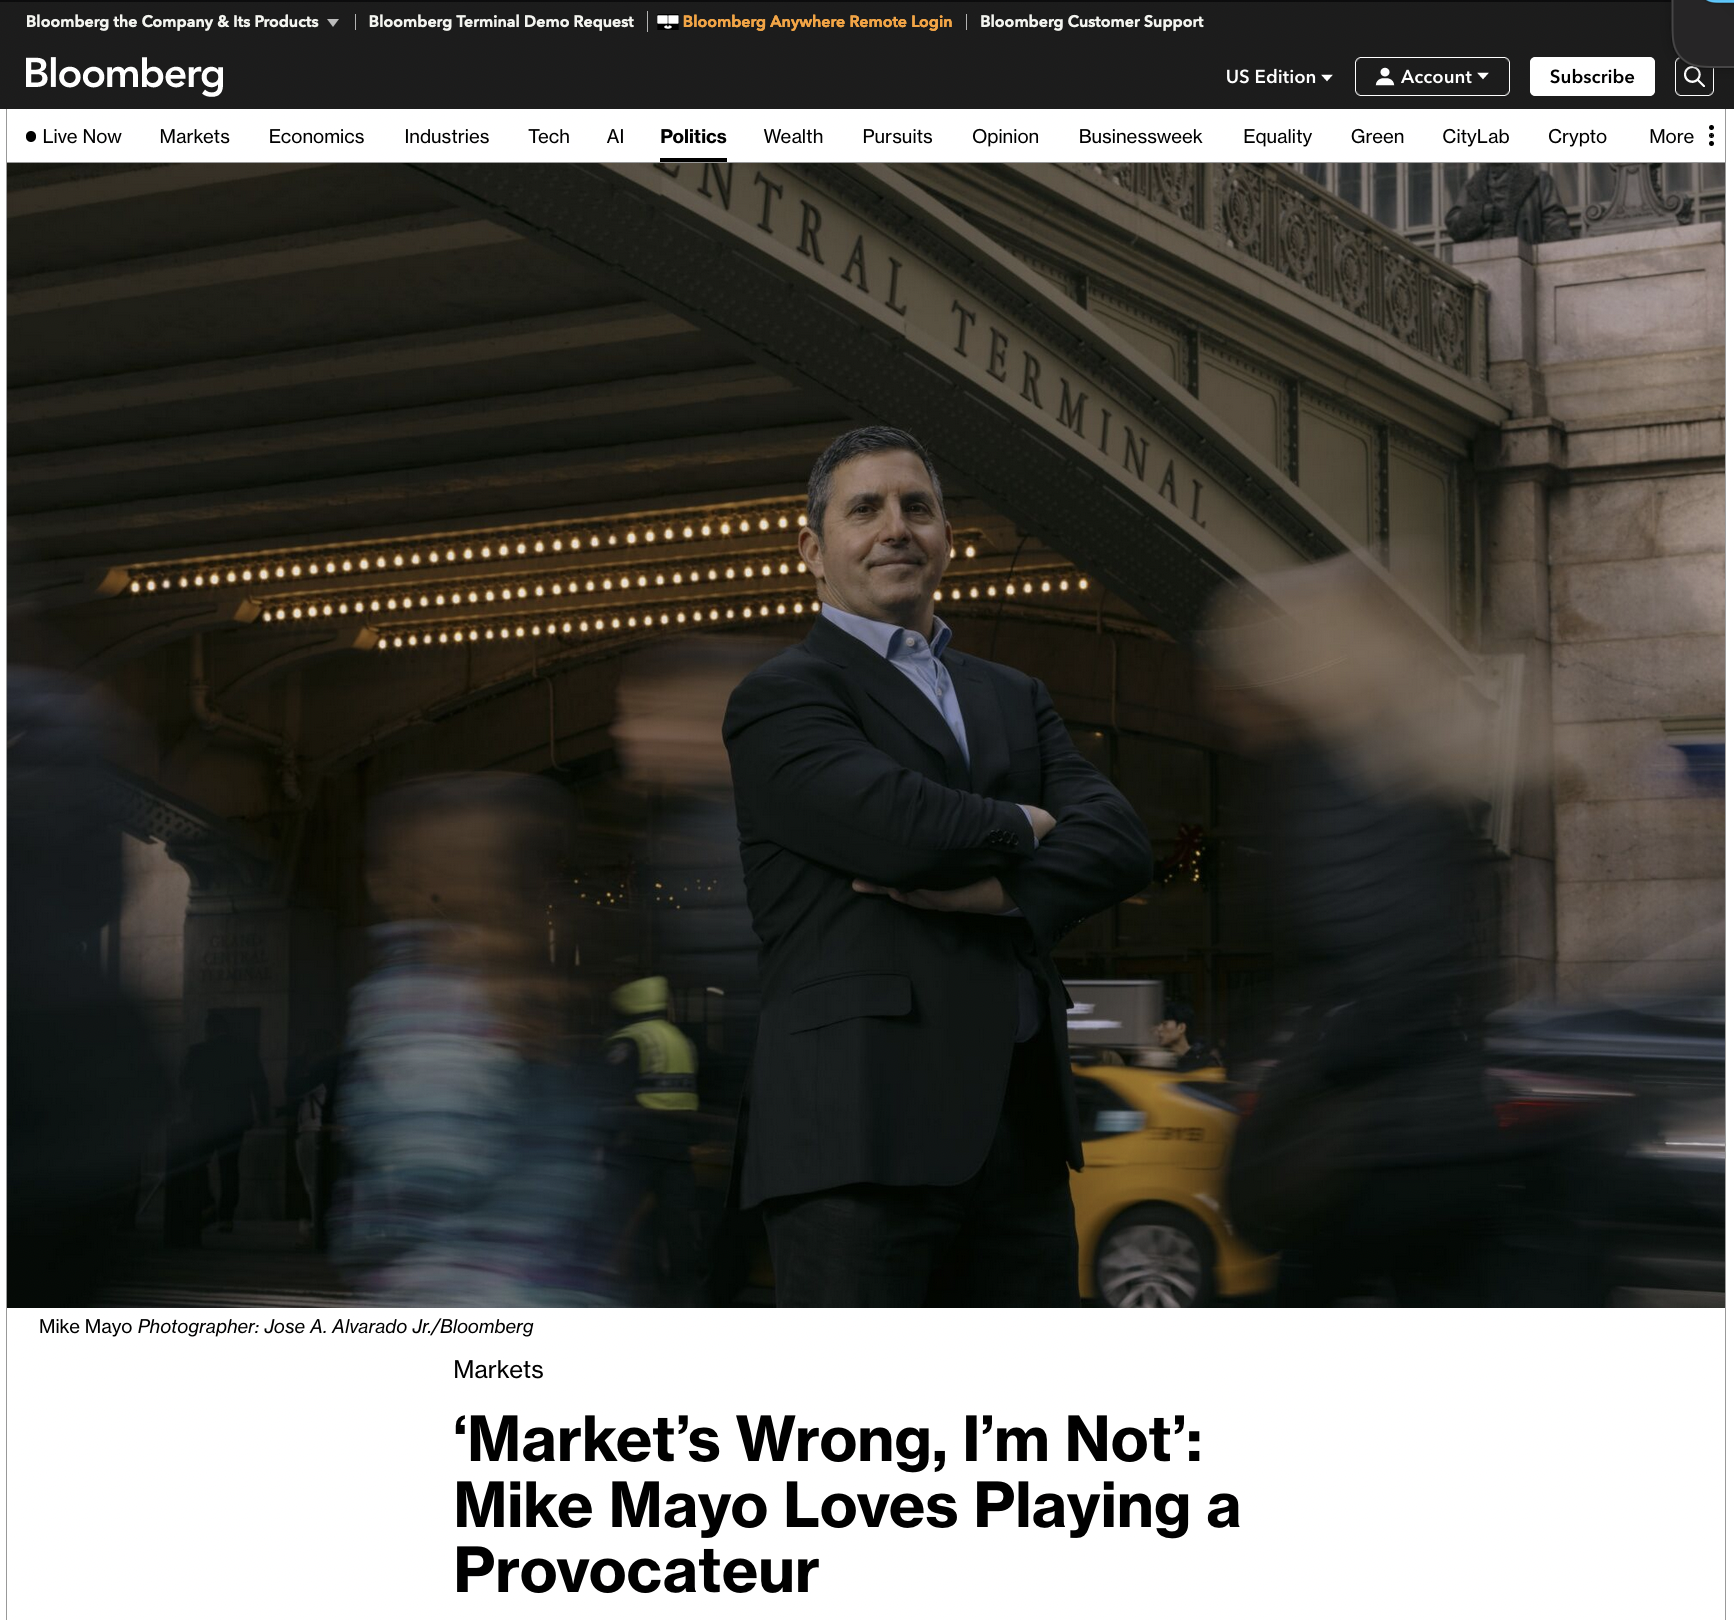 for Bloomberg: ‘Market’s Wrong, I’m Not’: Mike Mayo Loves Playing a Provocateur